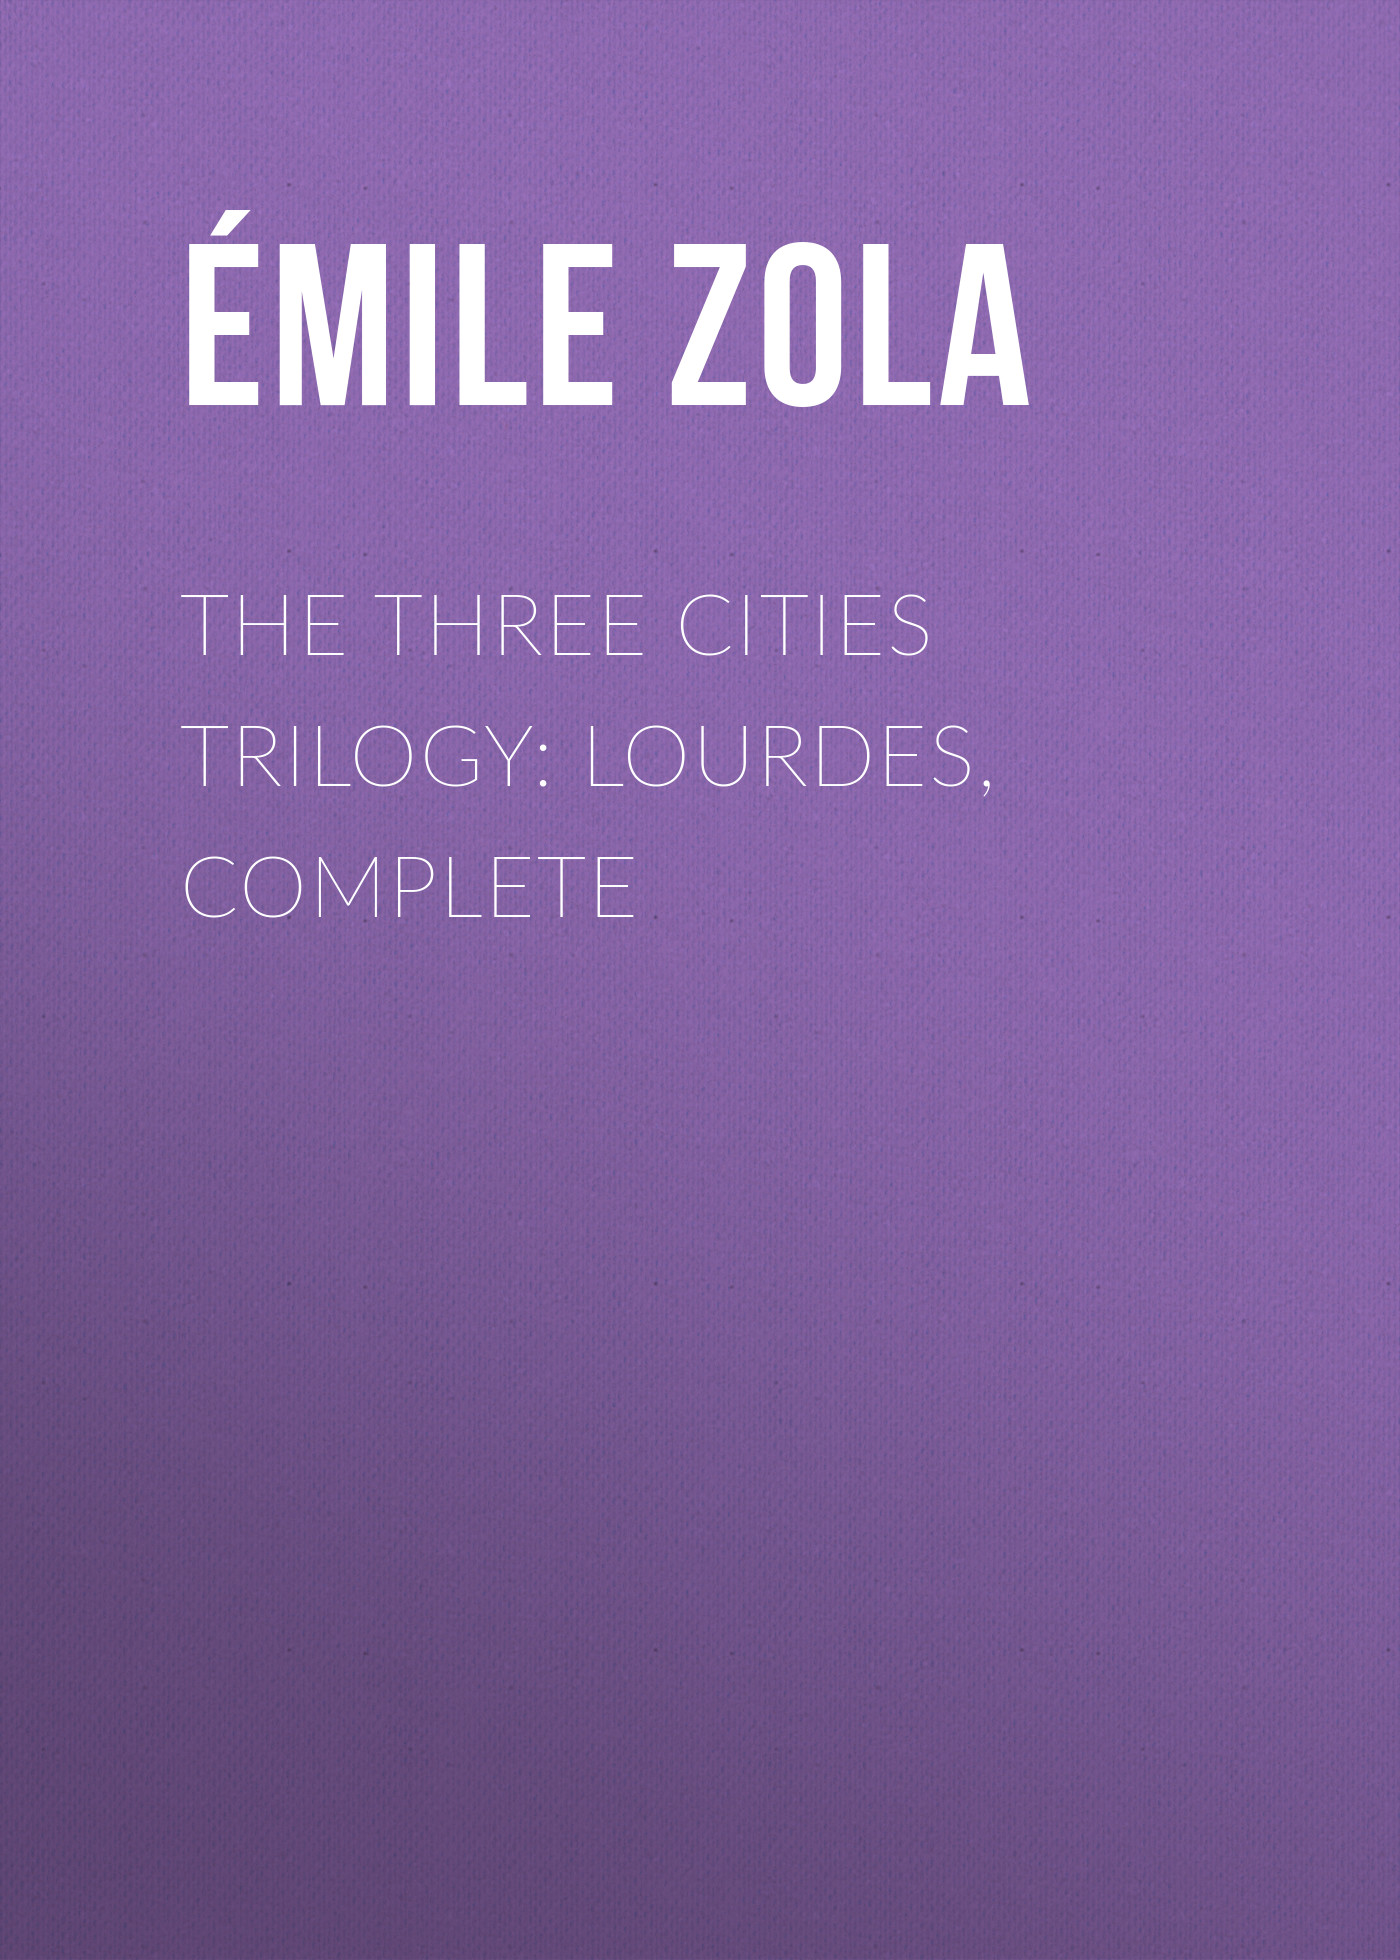 The Three Cities Trilogy: Lourdes, Complete